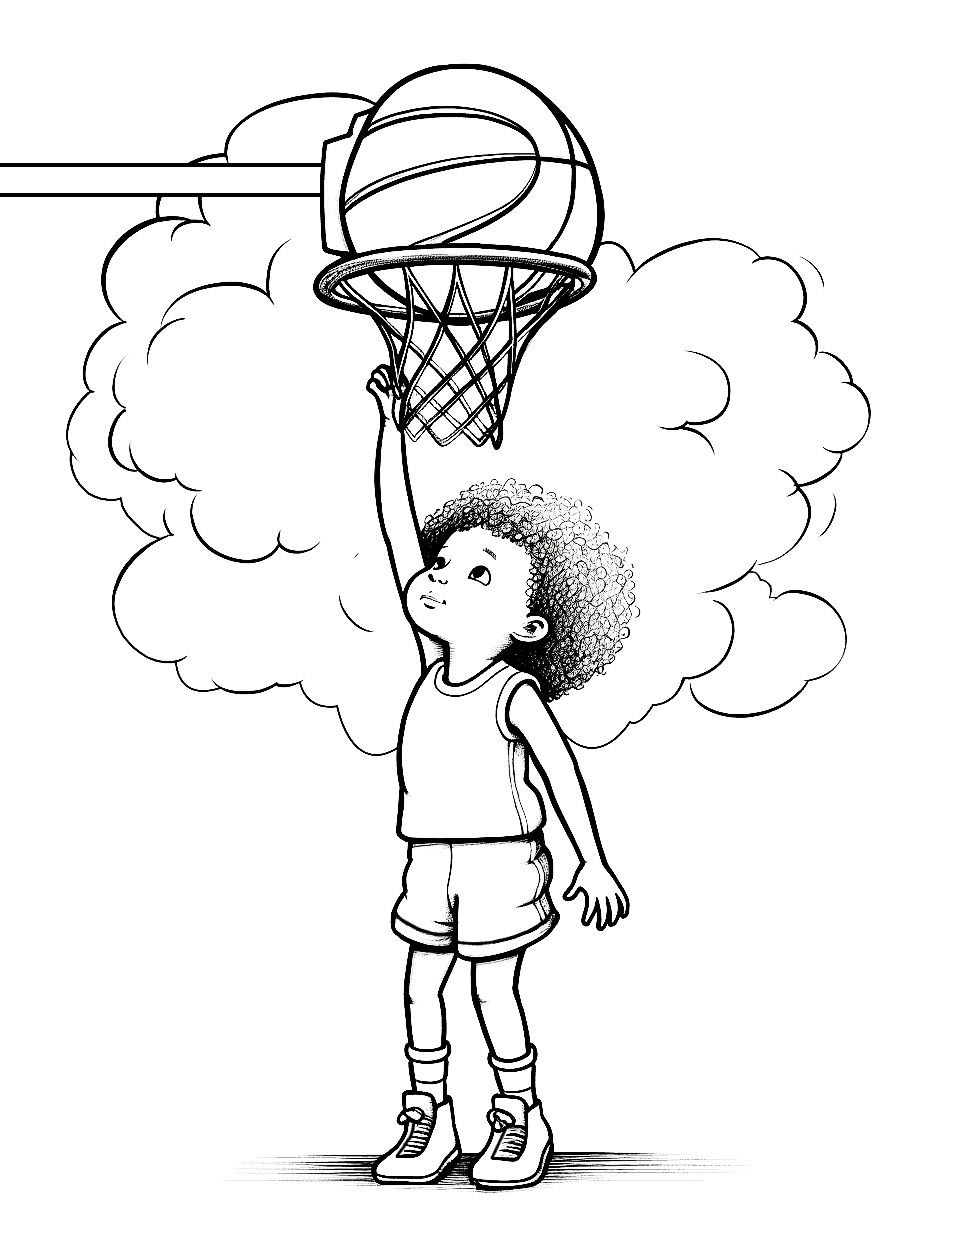 Tiny Player's Big Dream Basketball Coloring Page - A small child dreaming of playing in the NBA, shooting a basket on a lowered hoop.